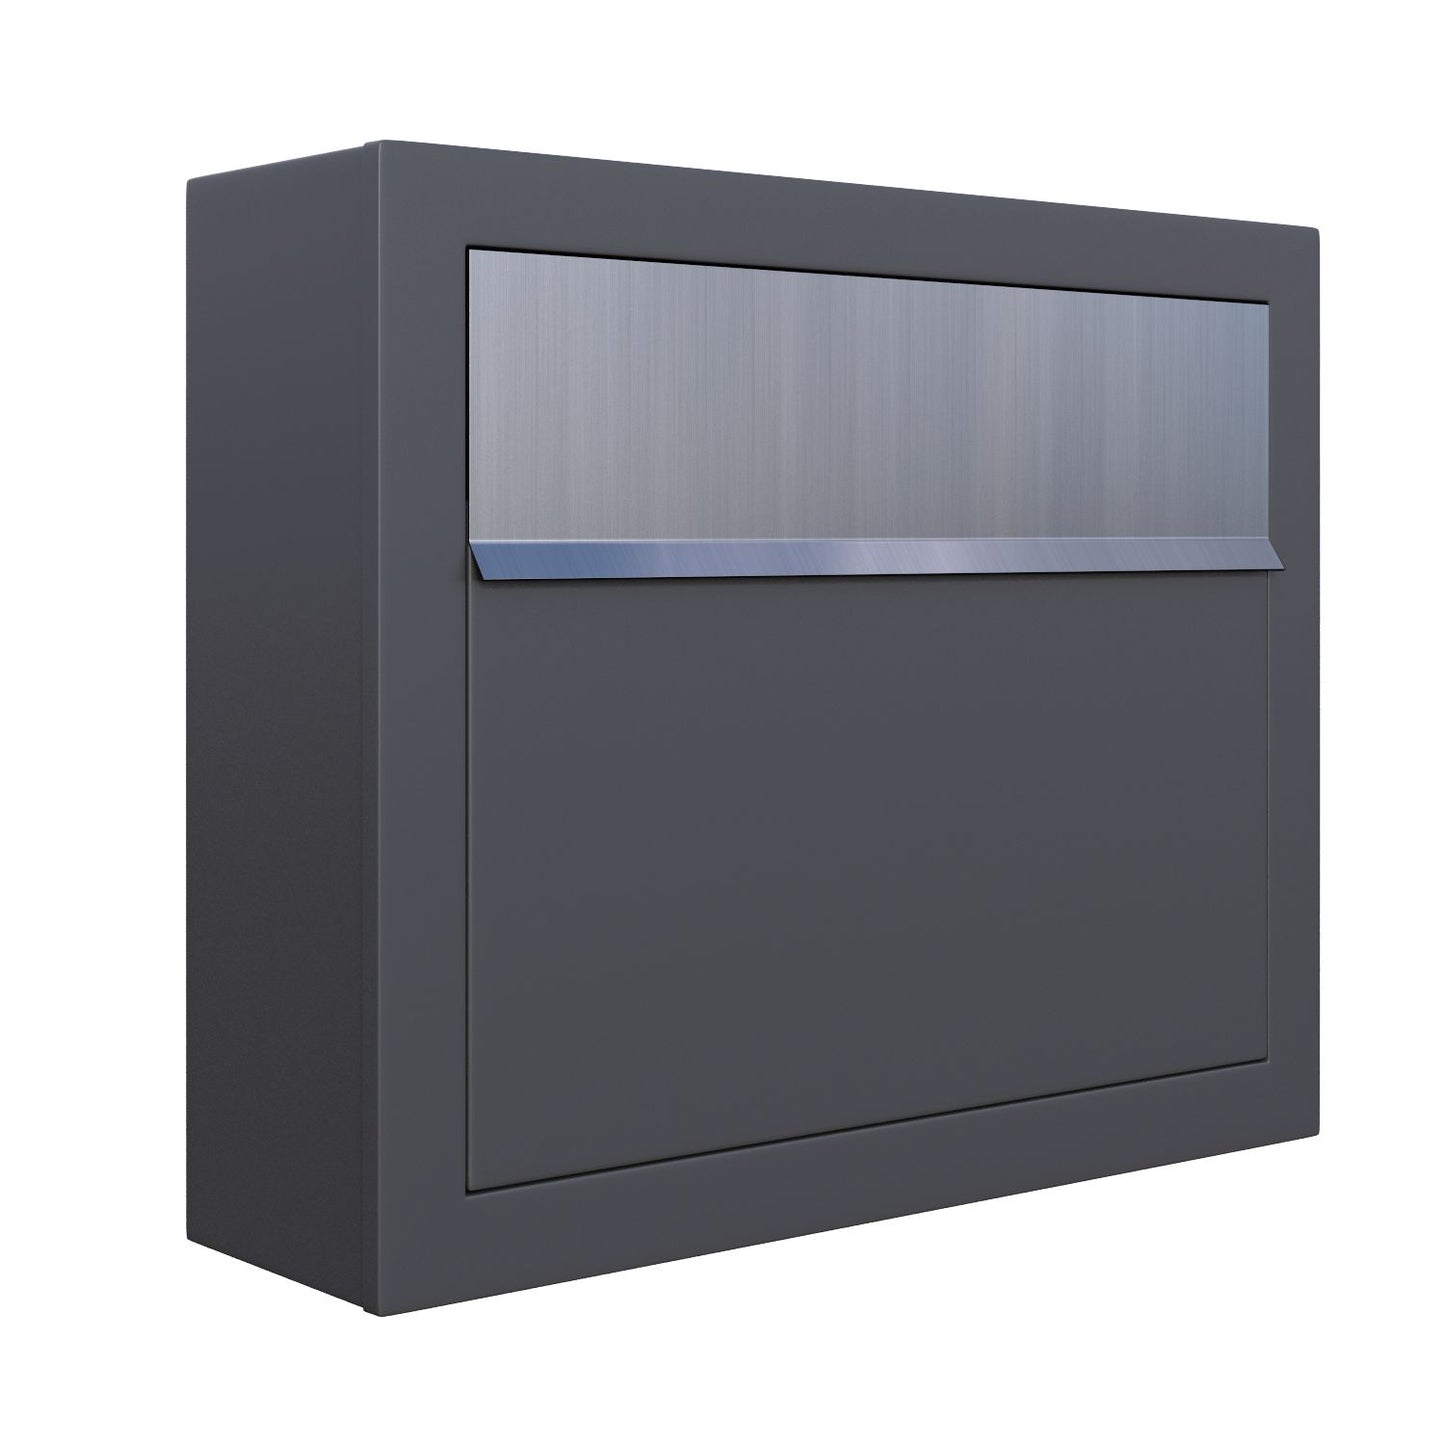 ELEGANCE by Bravios - Modern wall-mounted anthracite mailbox with stainless steel accents